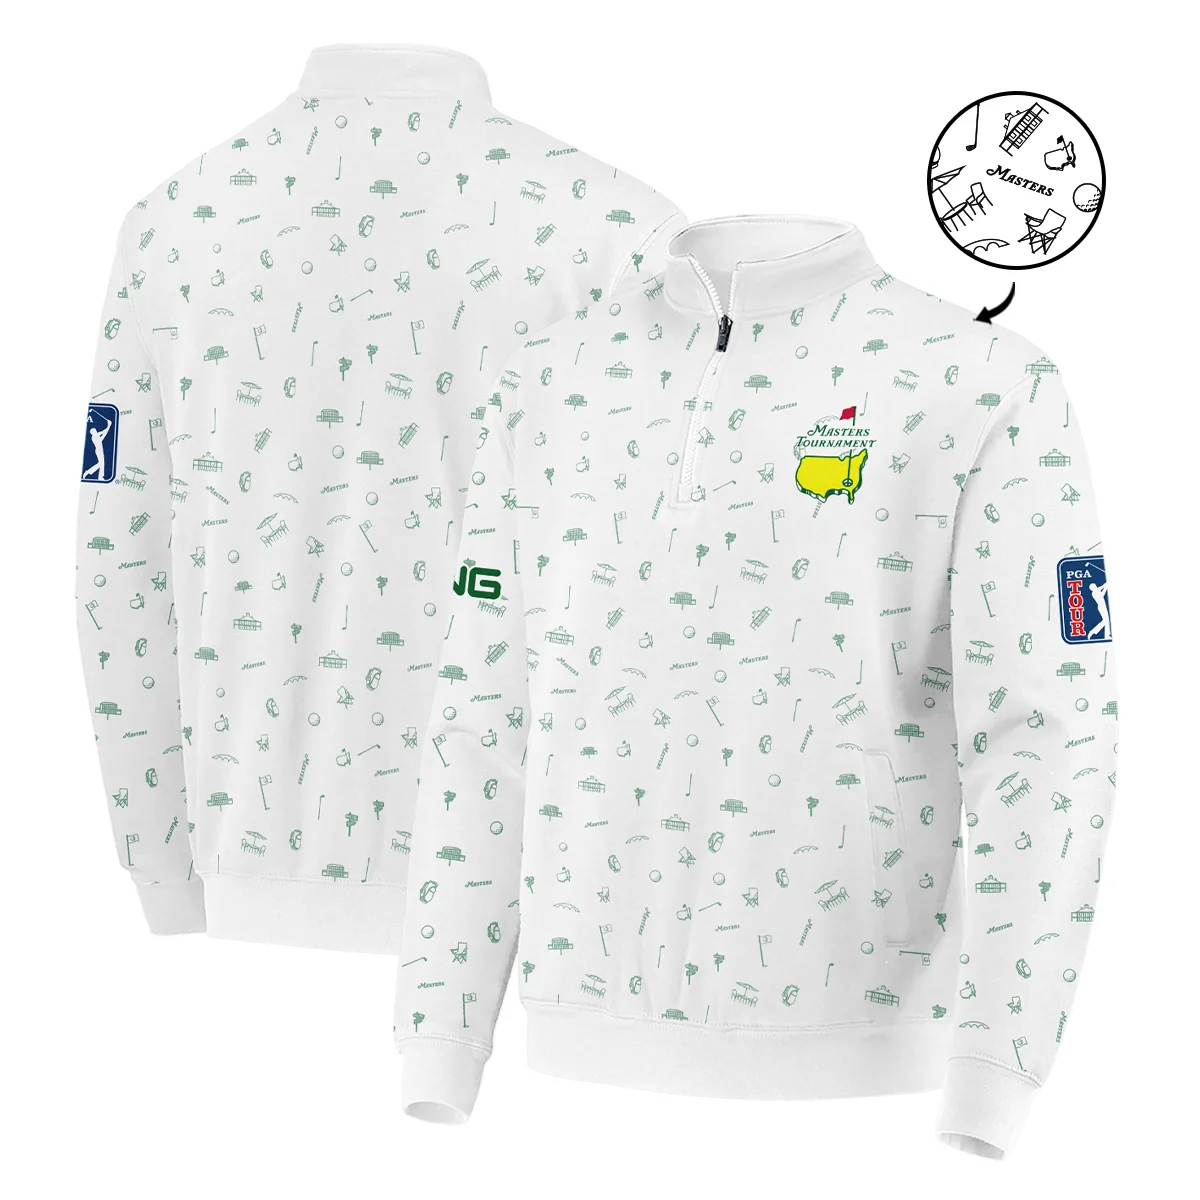 Golf Masters Tournament Ping Bomber Jacket Augusta Icons Pattern White Green Golf Sports All Over Print Bomber Jacket